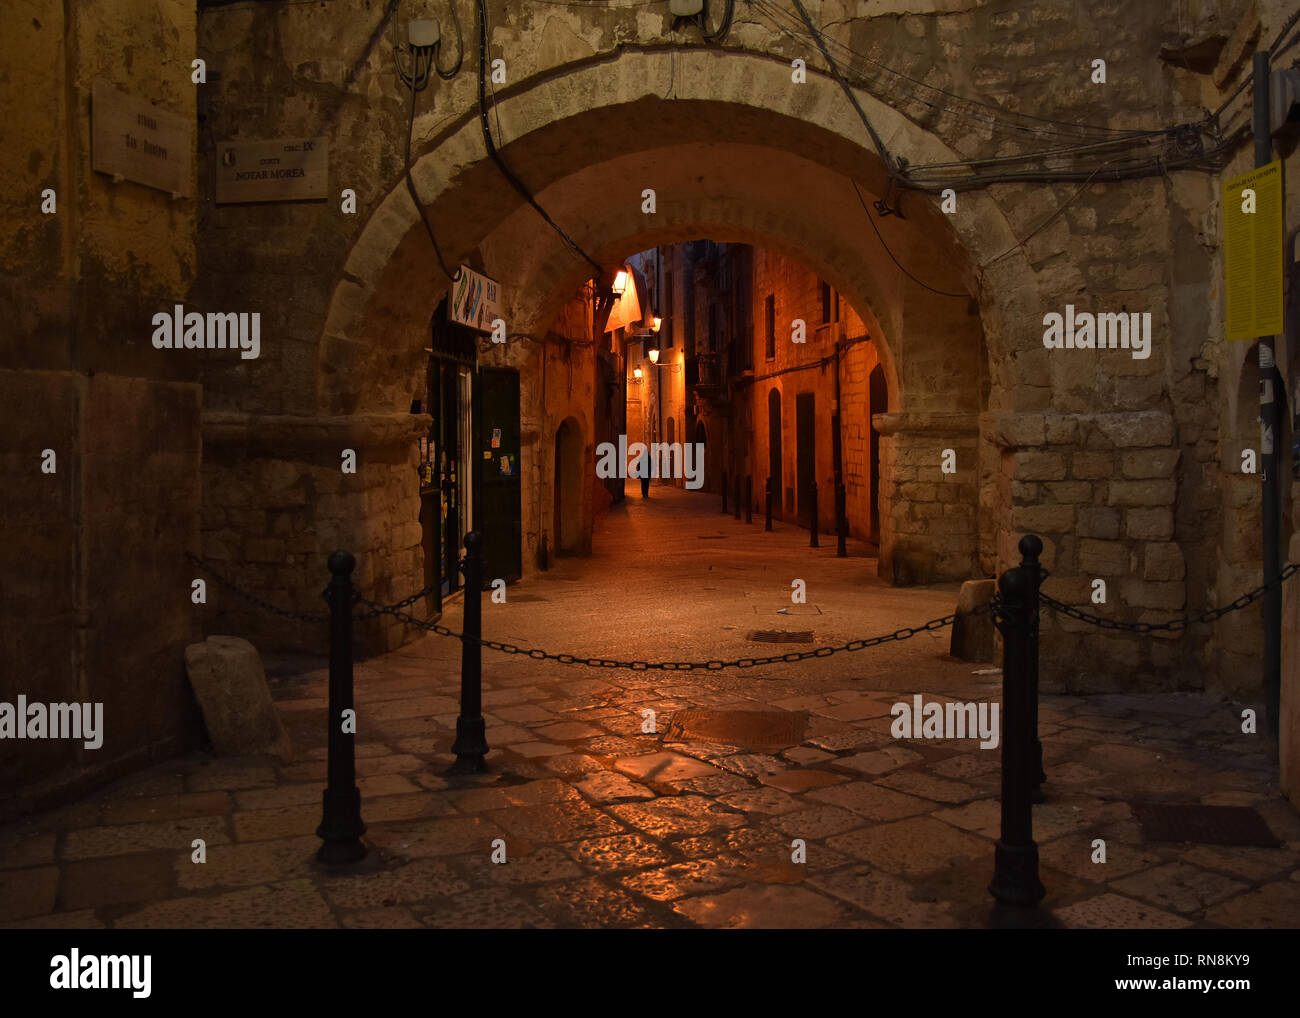 BARI, ITALY - FEBRUARY 8, 2019. Night view in amazing Old Town , historical center of Bari , Italy Stock Photo